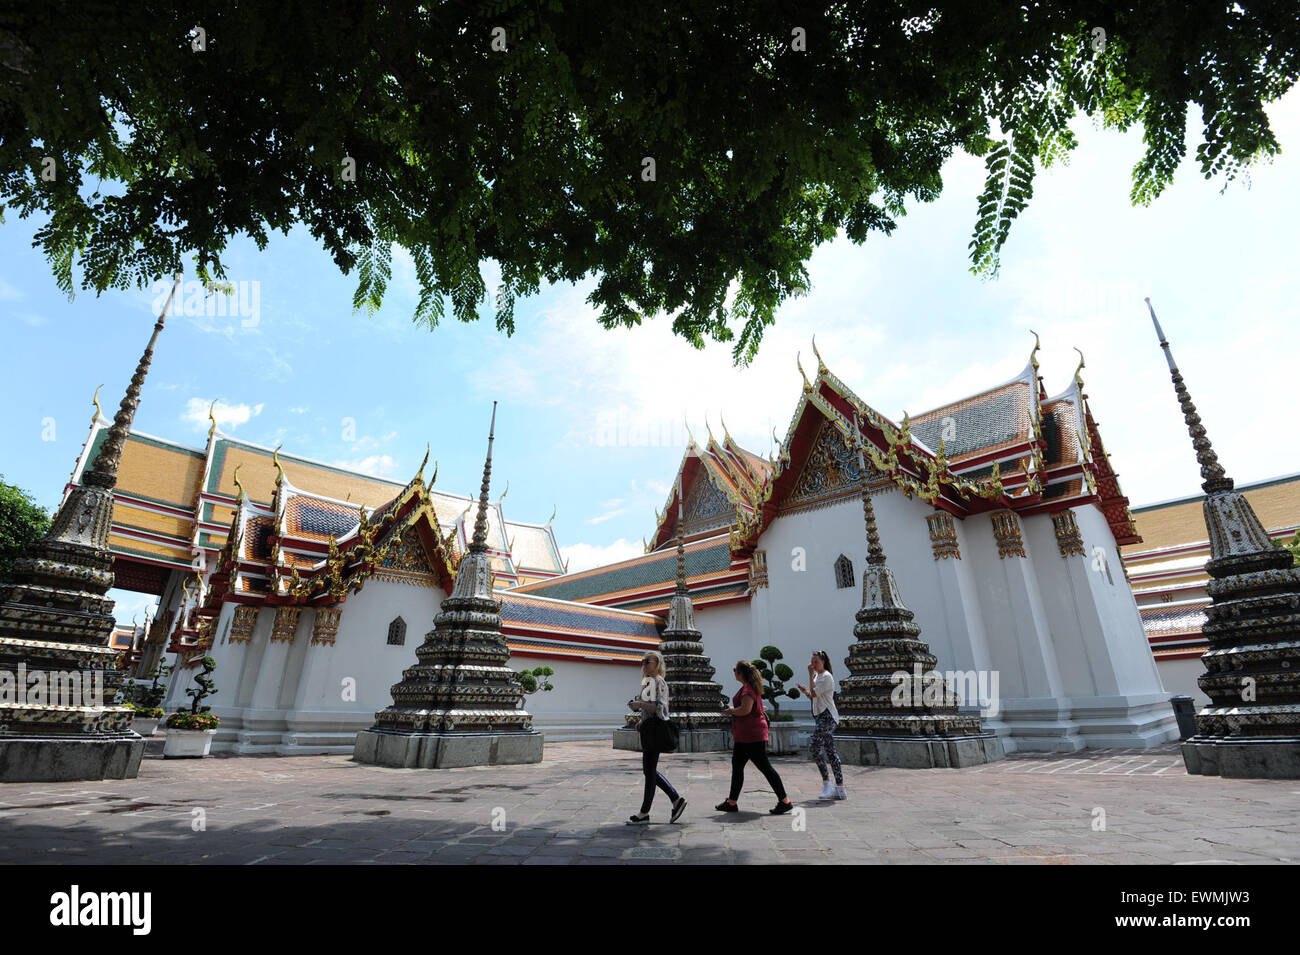 (150629) -- BANGKOK, June 29, 2015 (Xinhua) -- Tourists visit the Wat Pho Temple in Bangkok, Thailand, June 29, 2015. The number of tourists visiting Thailand reached more than 12.4 million between January and May this year, up 24.72 percent year on year, the Tourism Authority of Thailand (TAT) said on June 24. (Xinhua/Rachen Sageamsak) Stock Photo